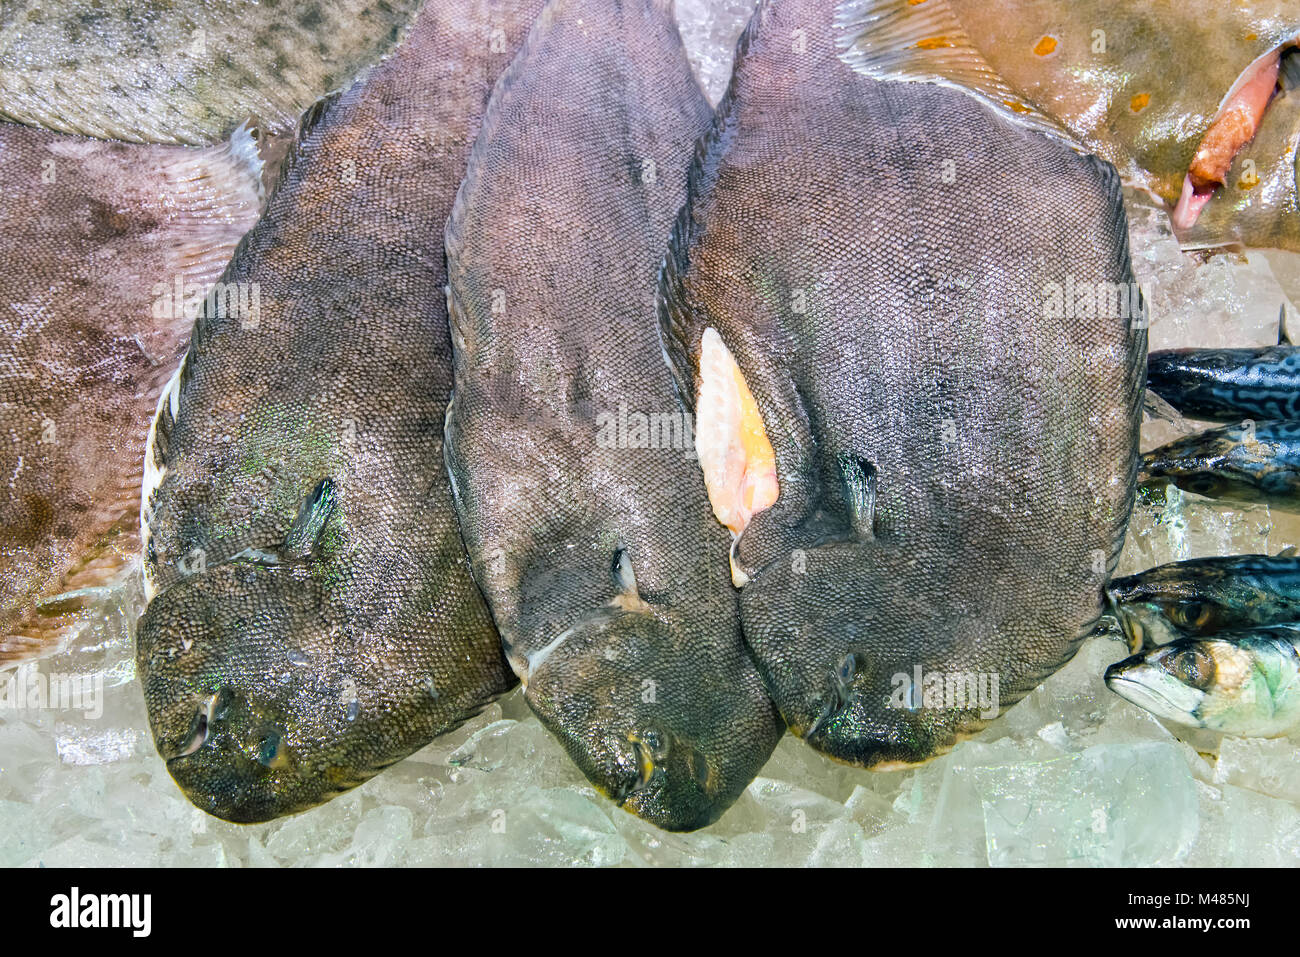 Sole fish on ice for sale at a market Stock Photo